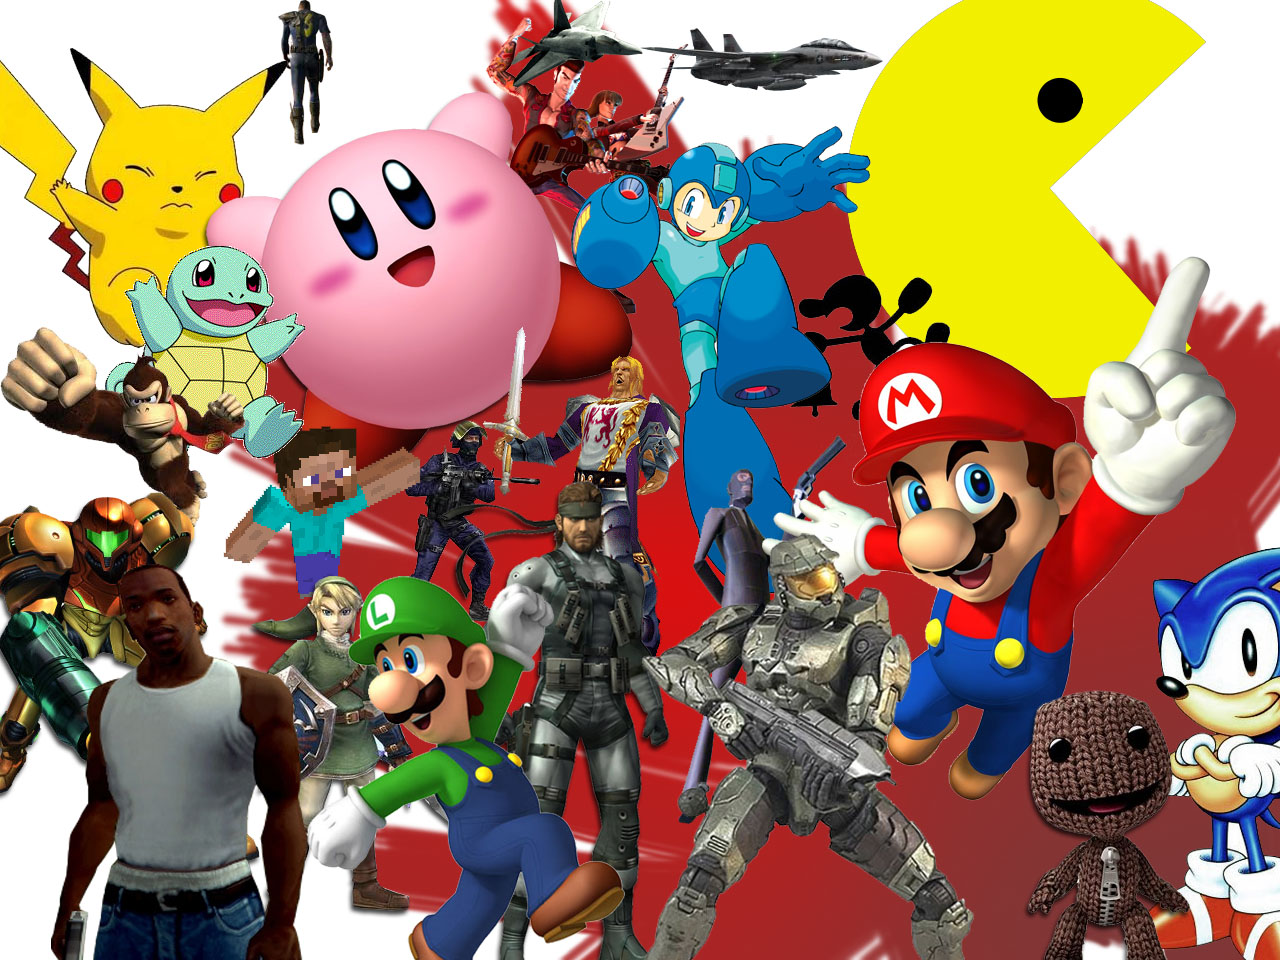 Group of different games characters